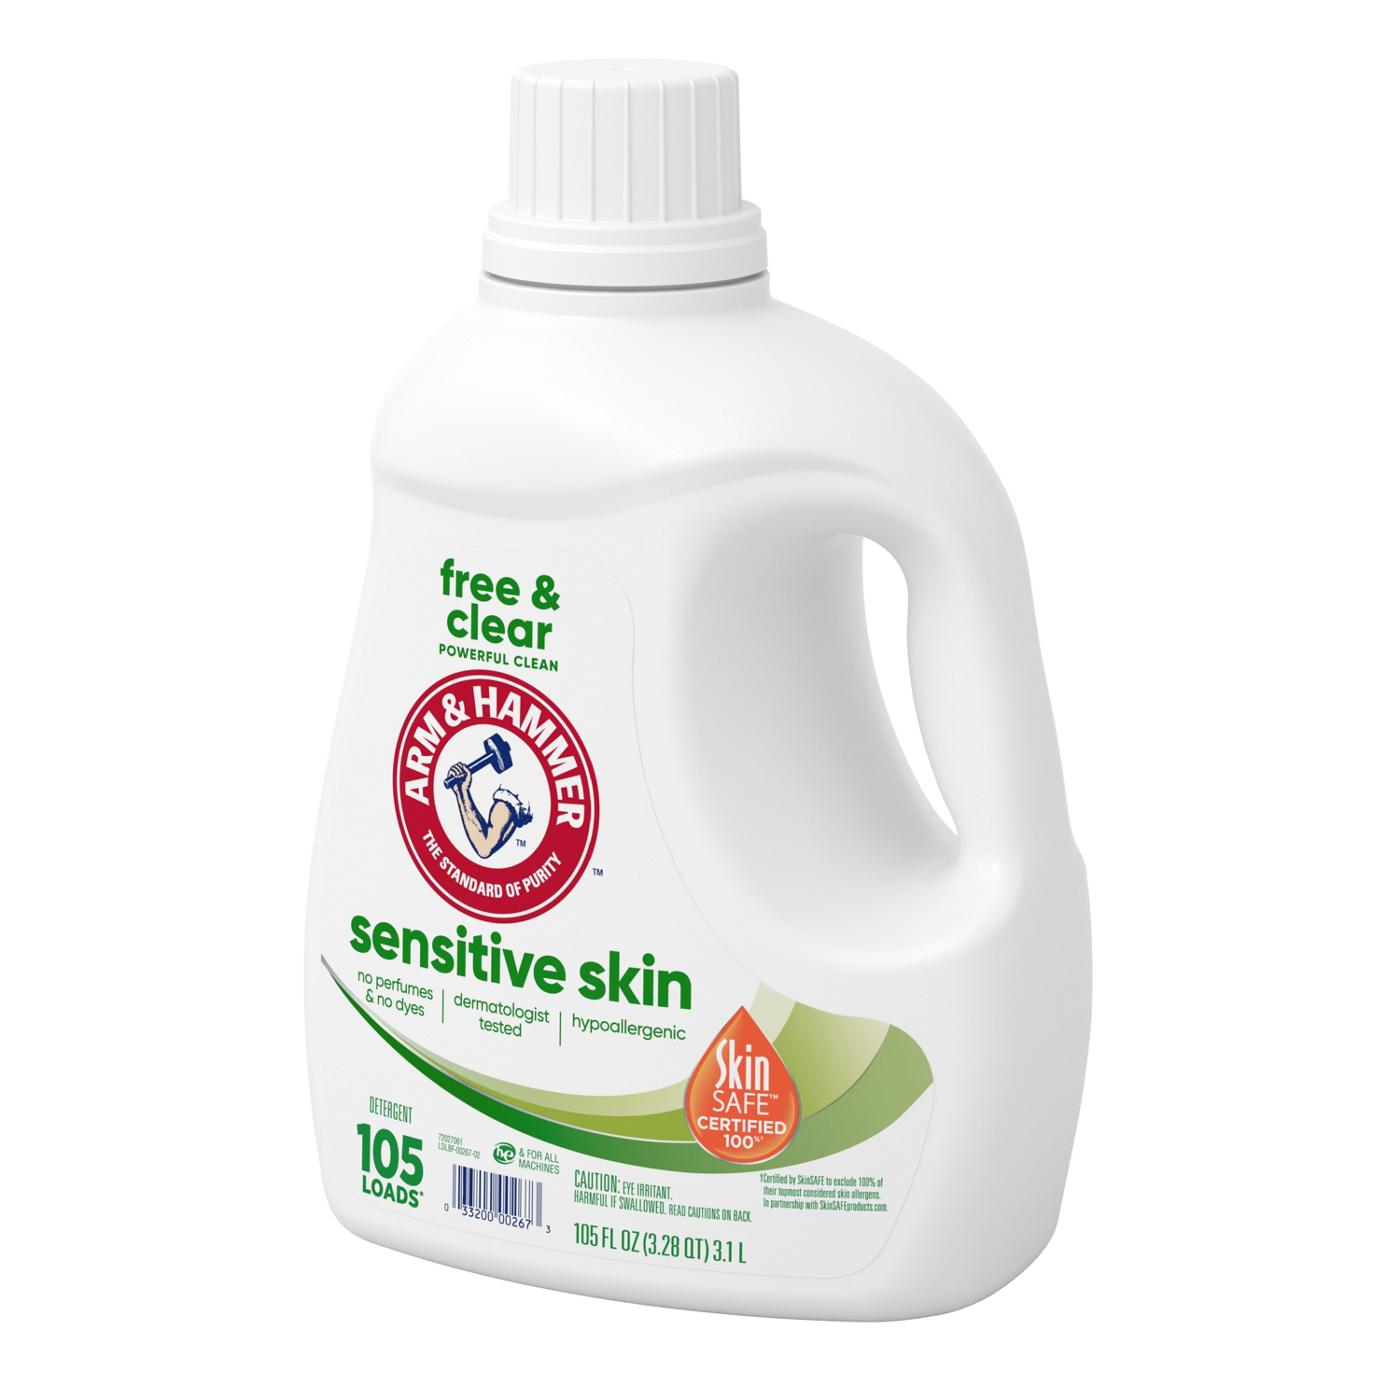 Arm & Hammer Free & Clear HE Liquid Laundry Detergent, 105 Loads; image 2 of 4